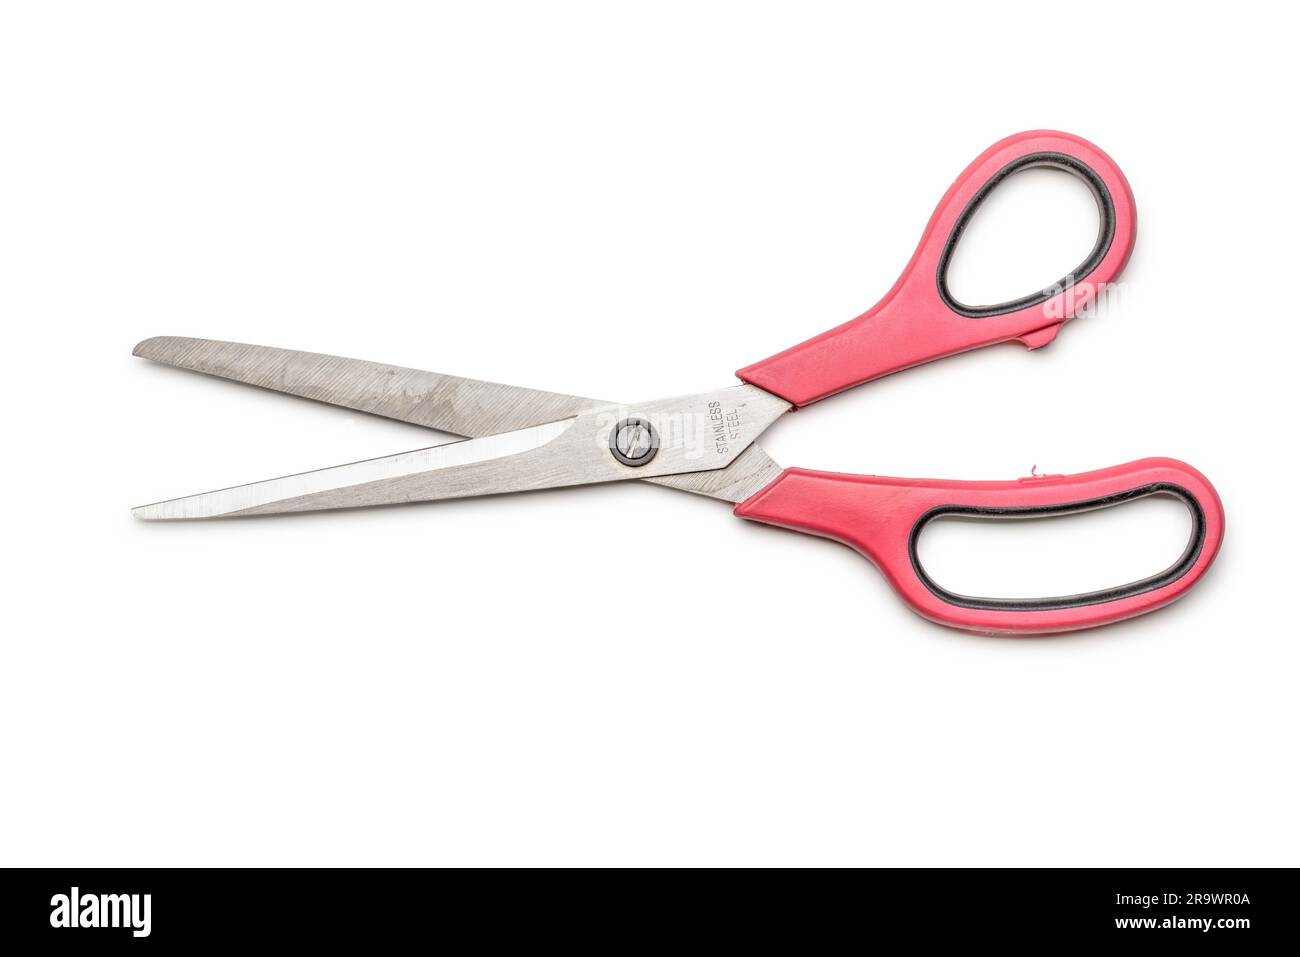 Modern scissors with pink handle isolated on white background Stock Photo